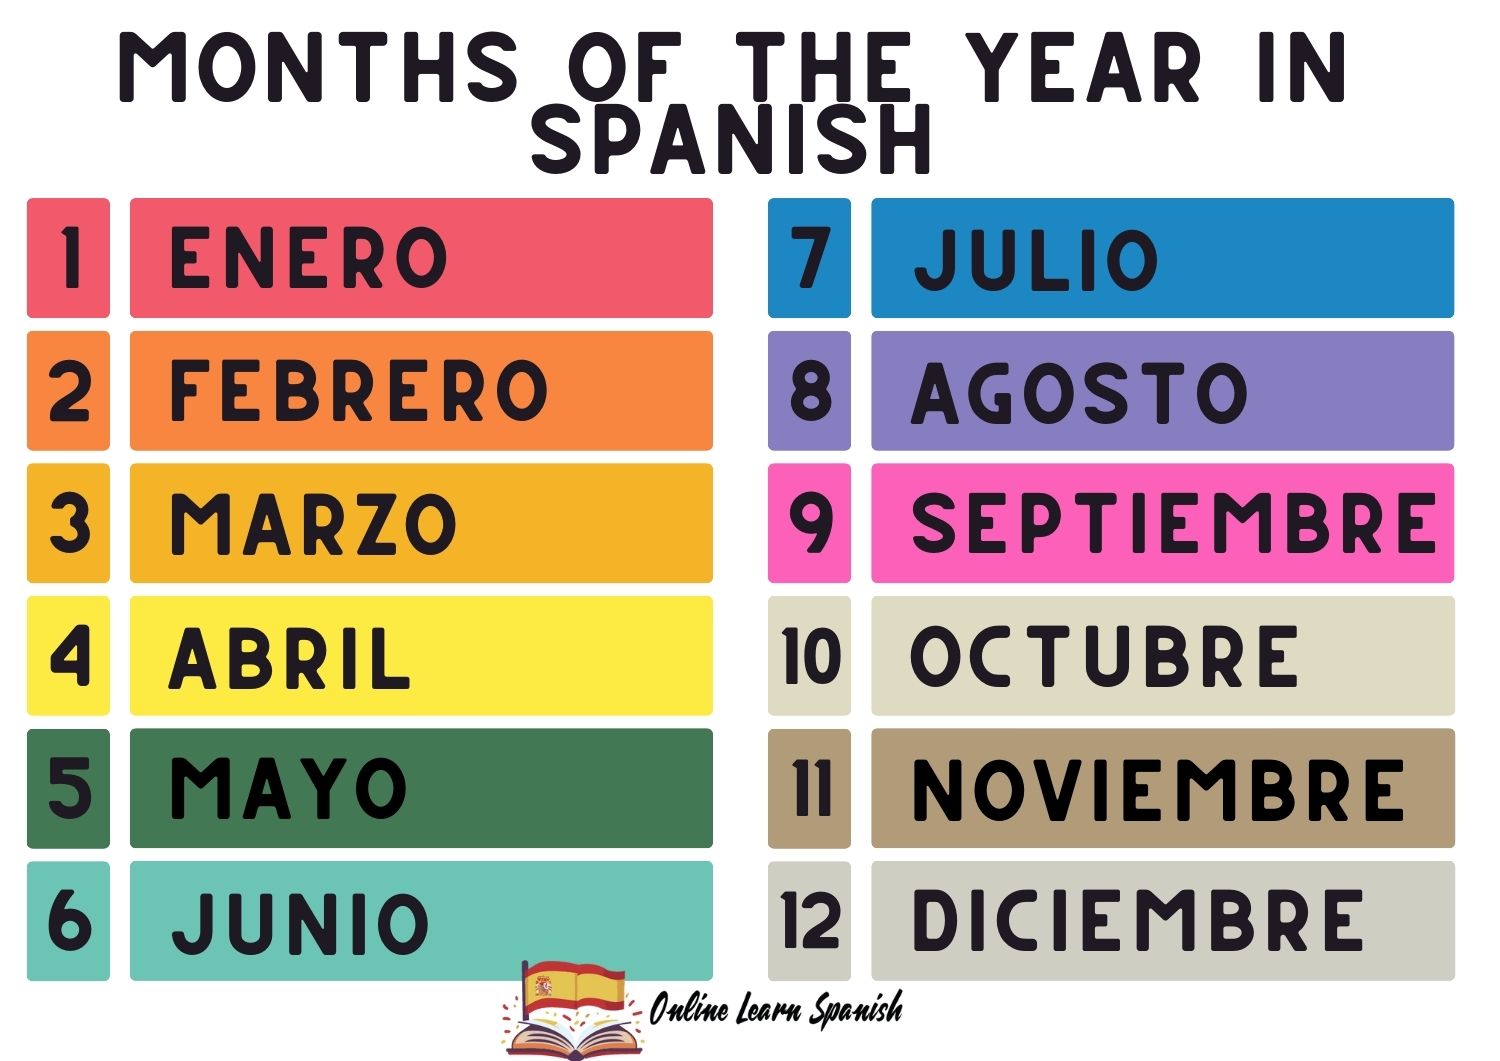 Months of the year in Spanish list